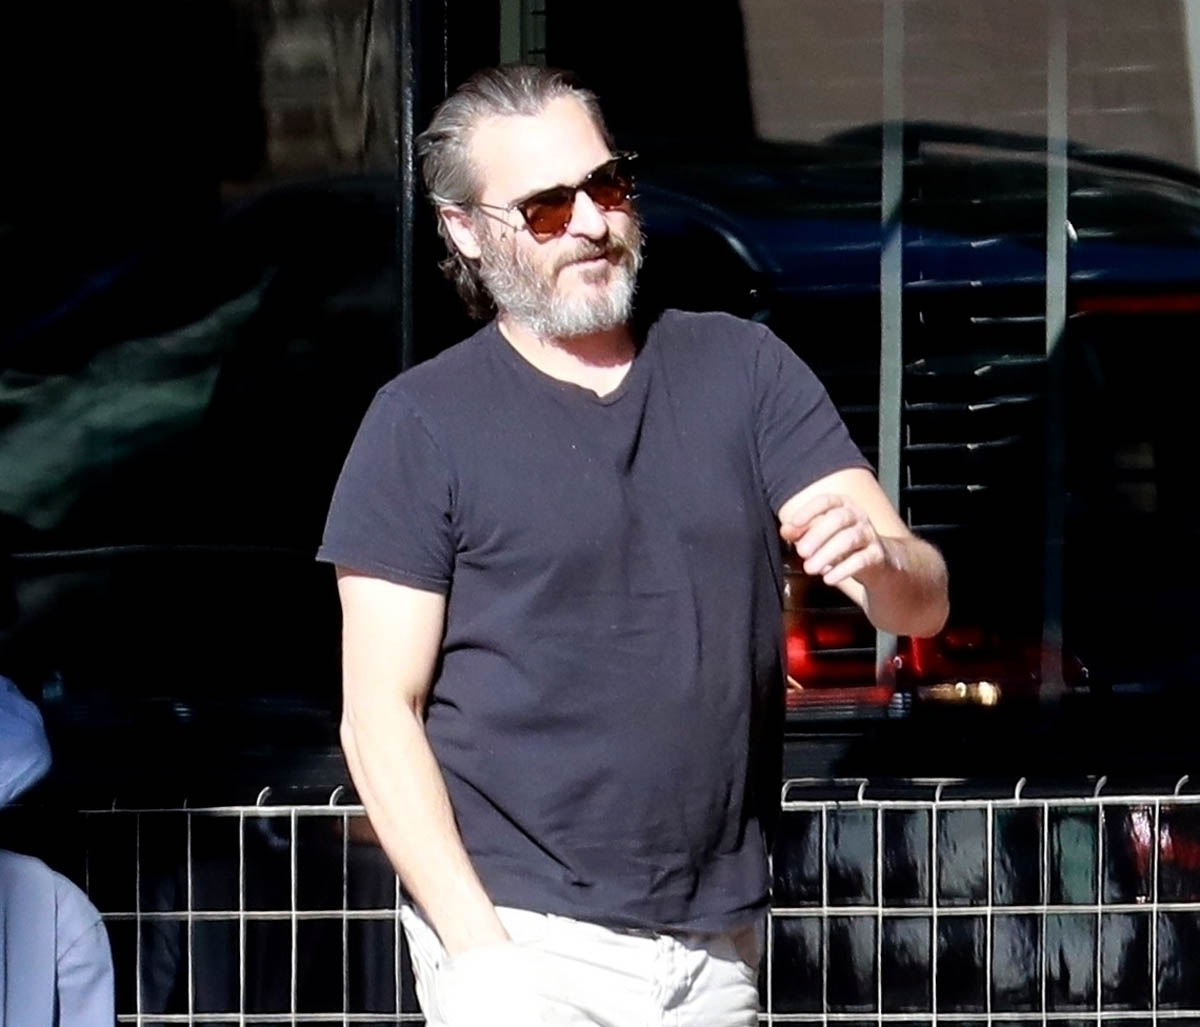 Joaquin Phoenix out in LA as it's reported he could be the next Joker in standalone movie1200 x 1027